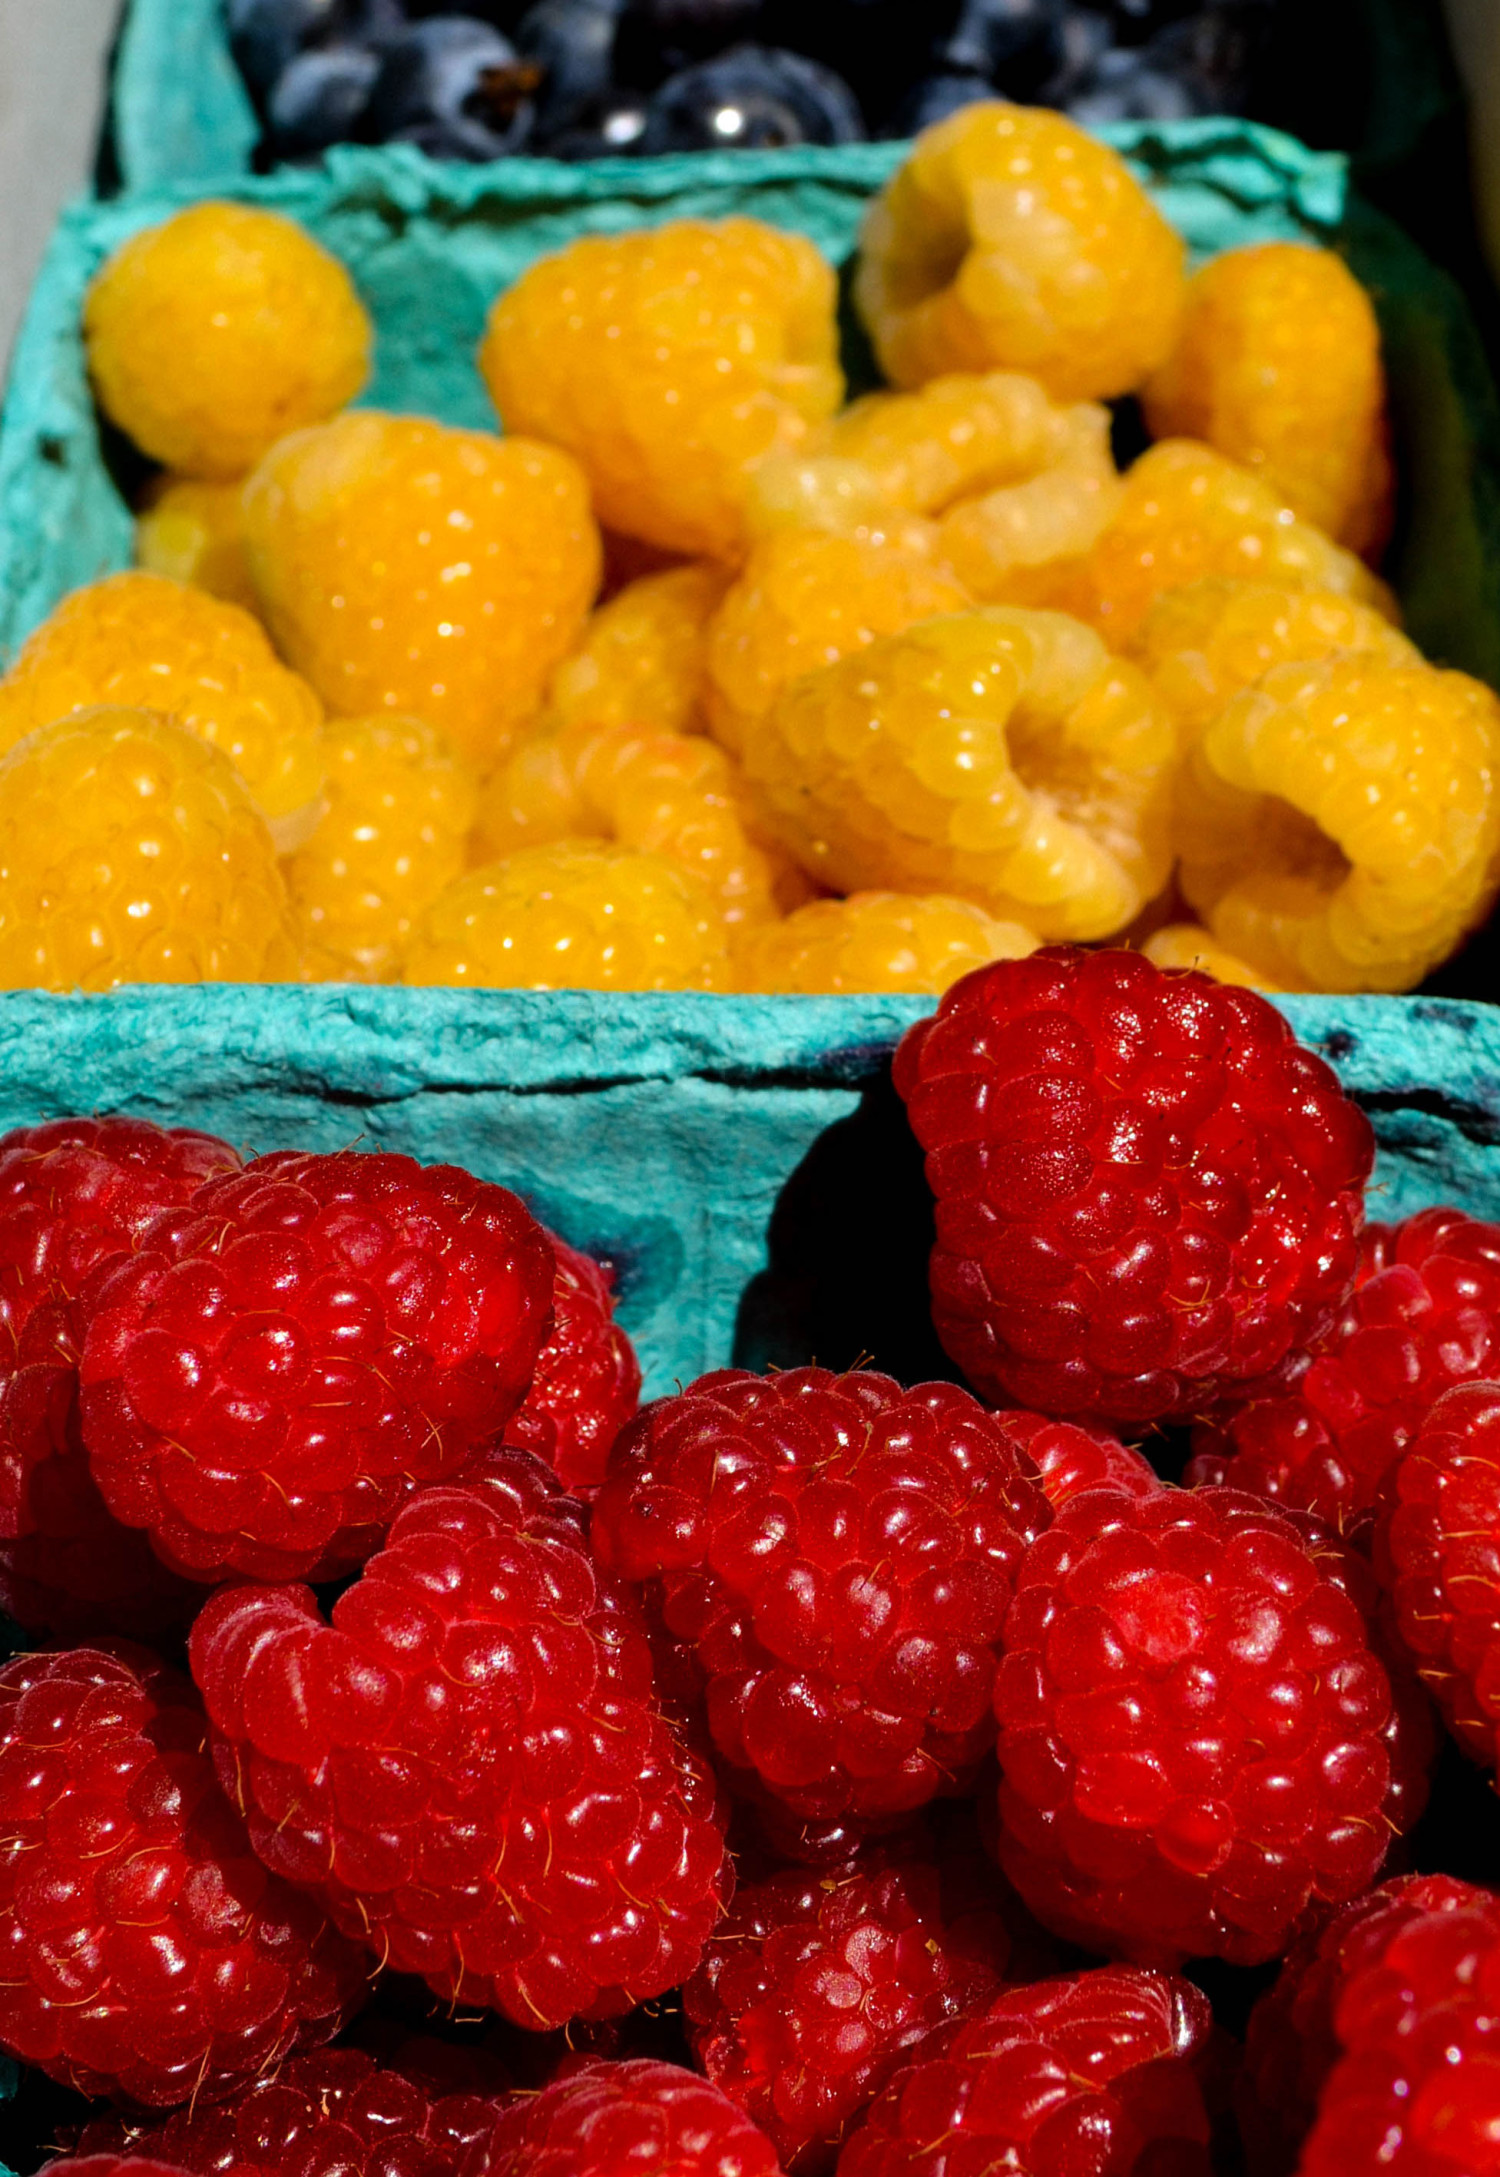 Diversivore background image showing a variety of fruits (raspberries and blueberries) in baskets.